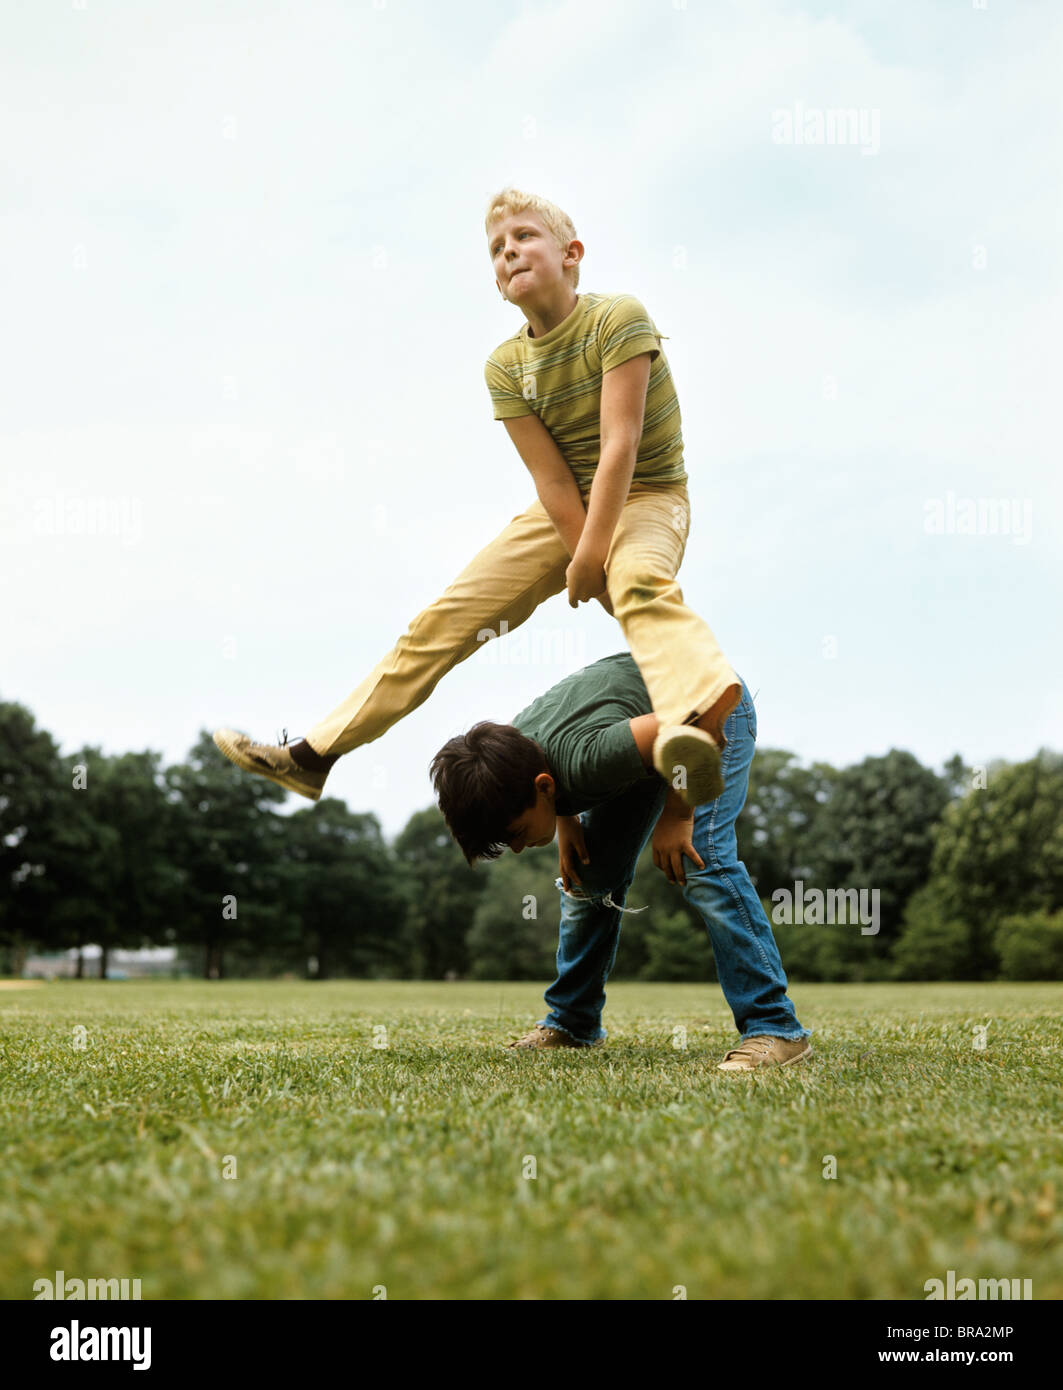 1970s TWO BOYS JUMPING PLAYING LEAPFROG LEAP FROG RETRO Stock Photo